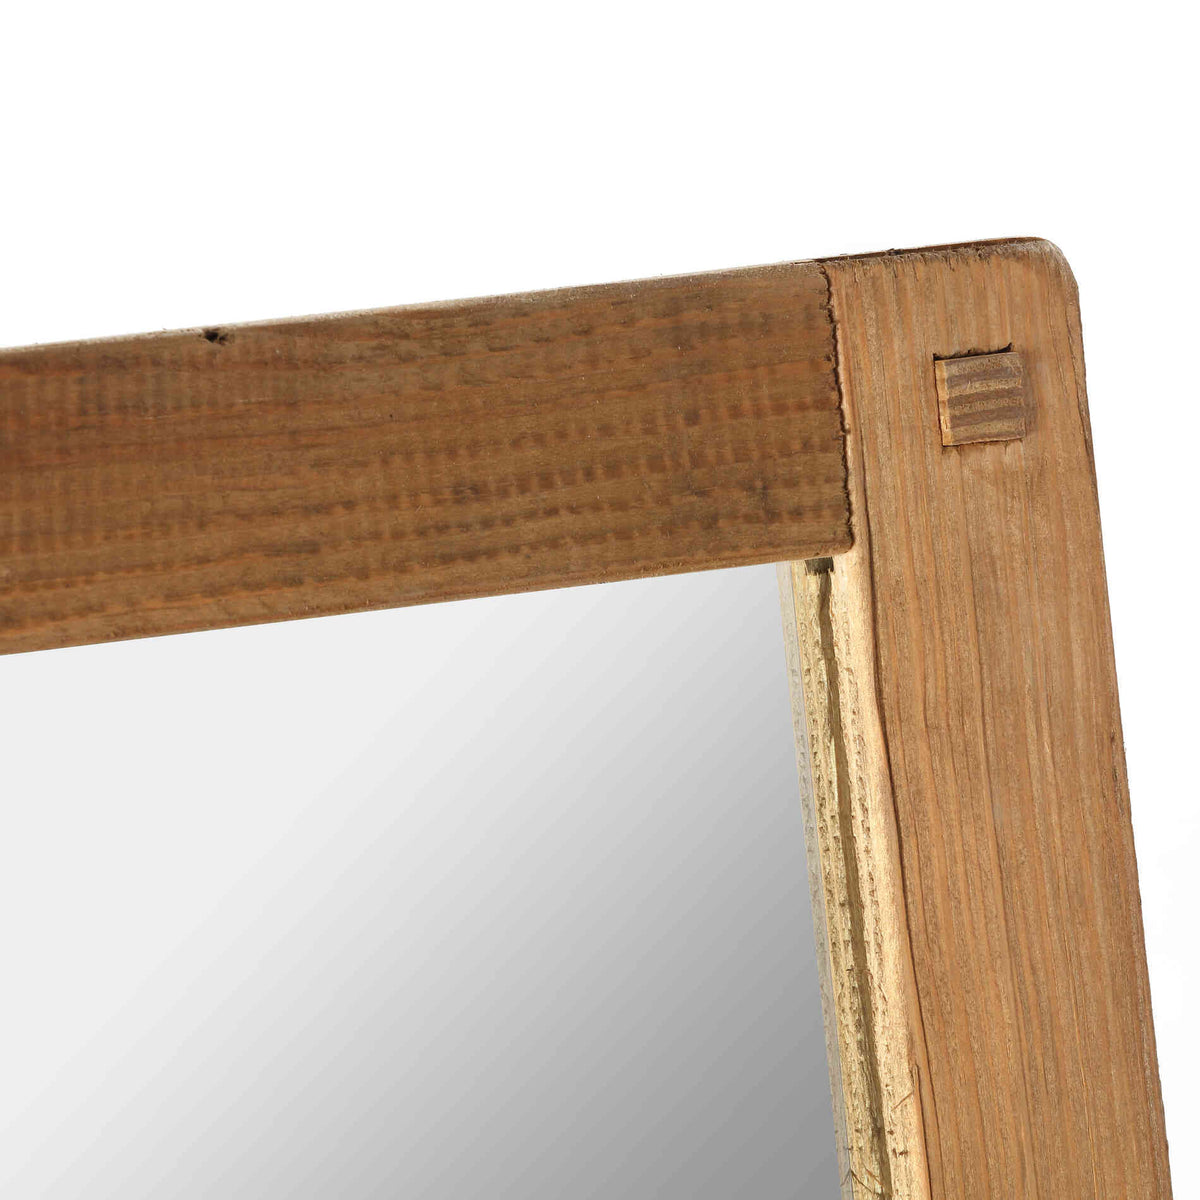 Bare Decor Dawson Wall Mount Mirror with Rustic Recycled Wood Frame 21x17